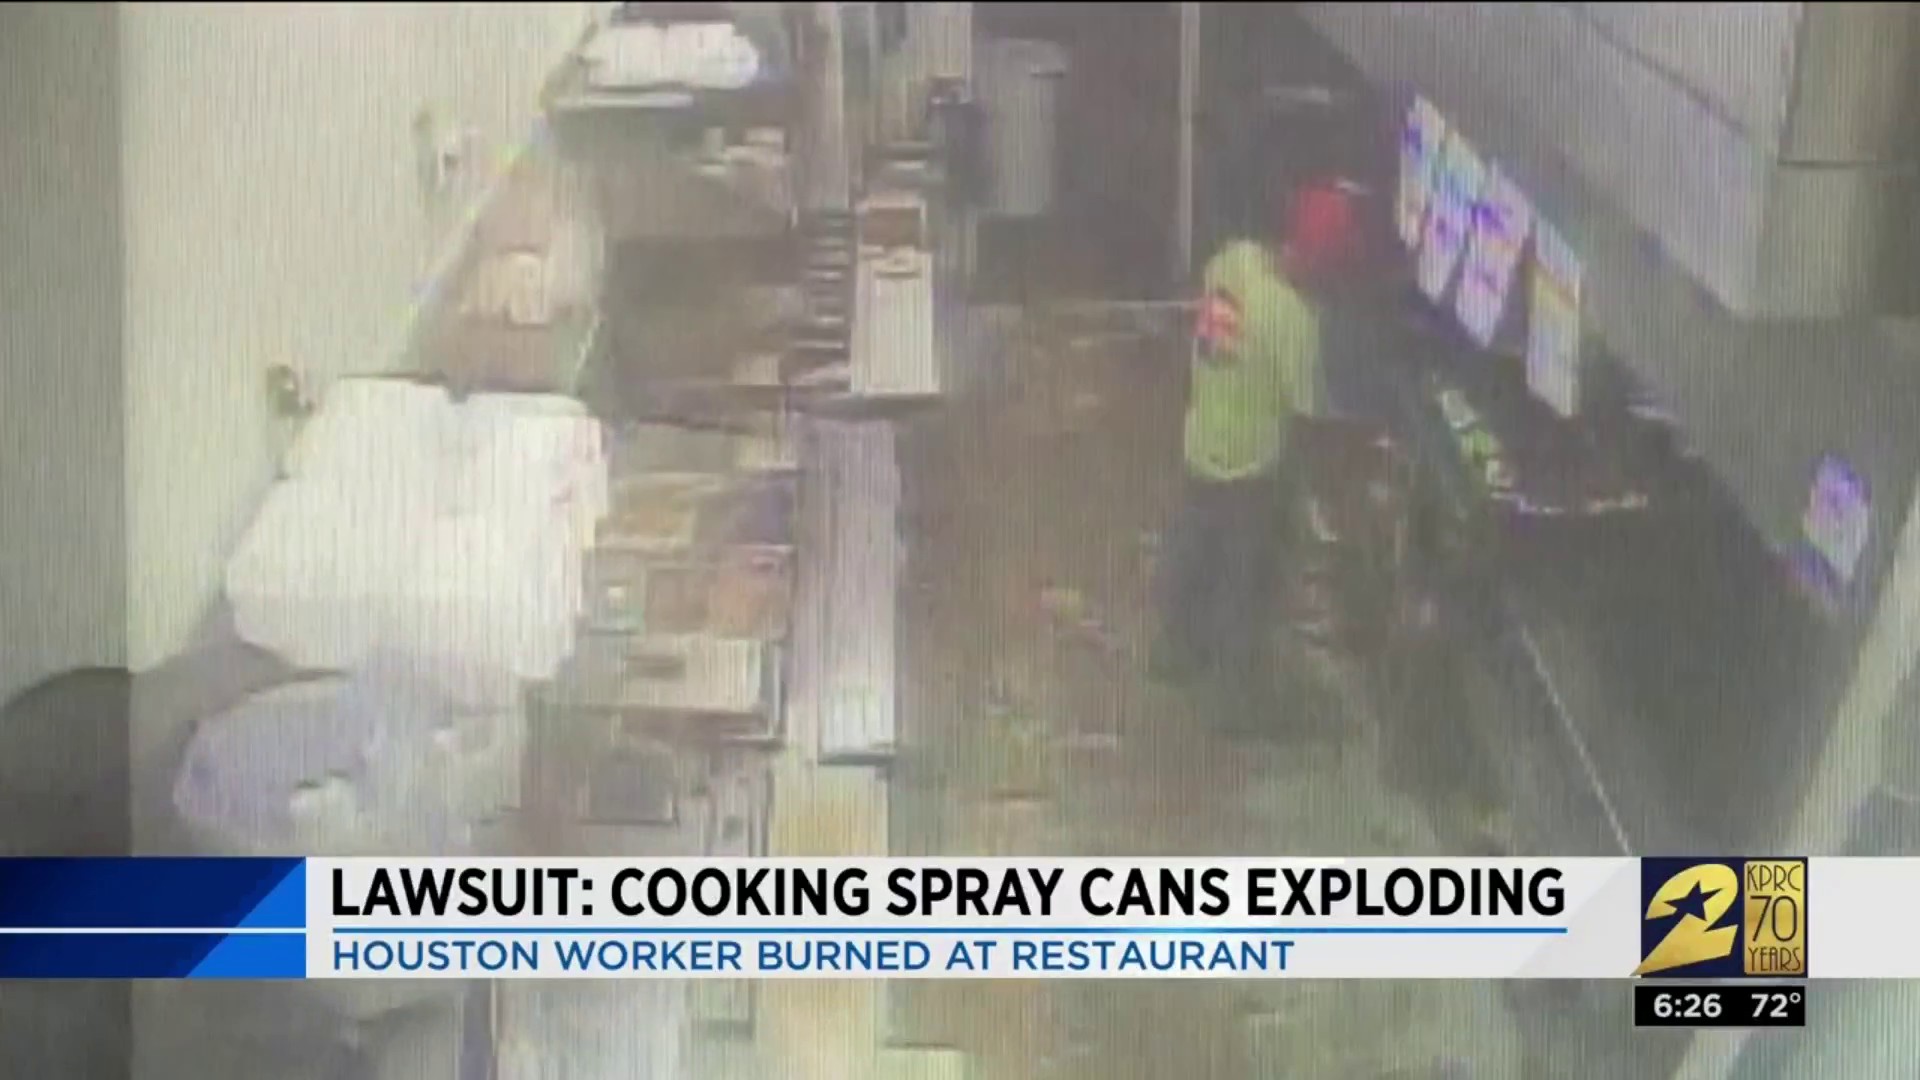 Lawsuits claim cans of Pam cooking spray are exploding: Here's